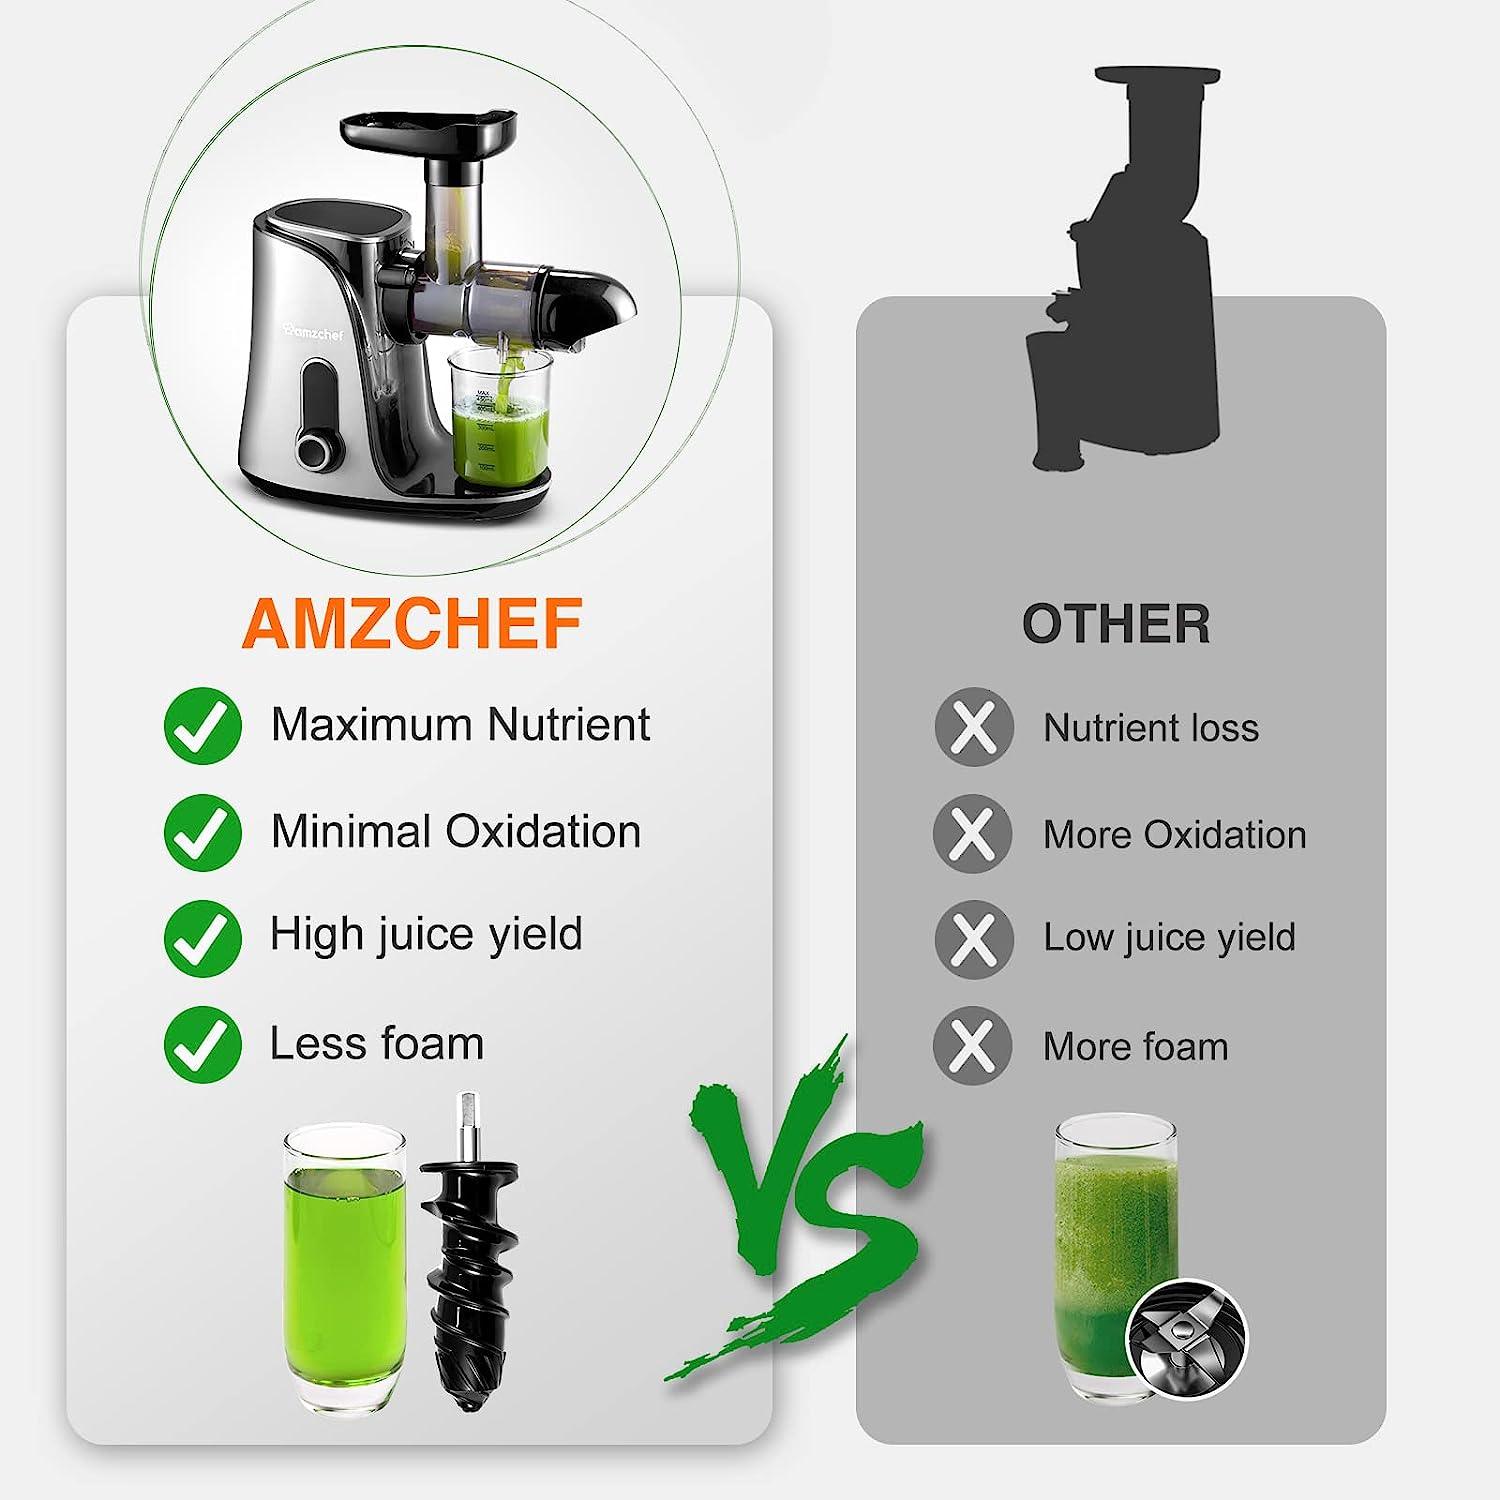 AMZCHEF Cold Press Juicer with 2 Speed Control - Massive Discounts